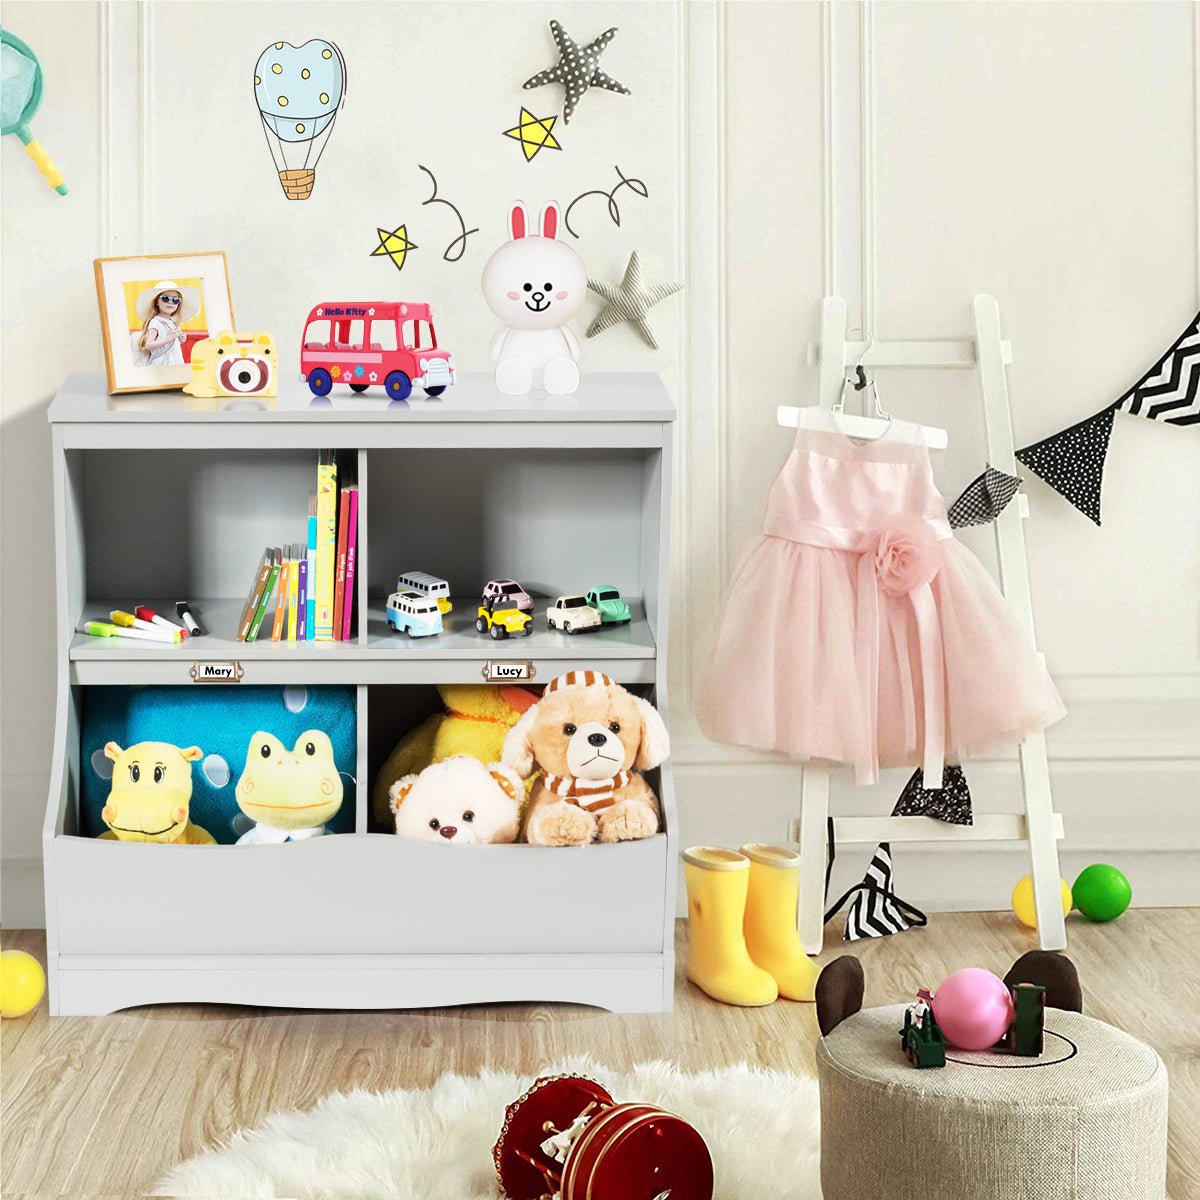 Organize with Grey - 2 Tier Toy Shelf and Lacquered Surface